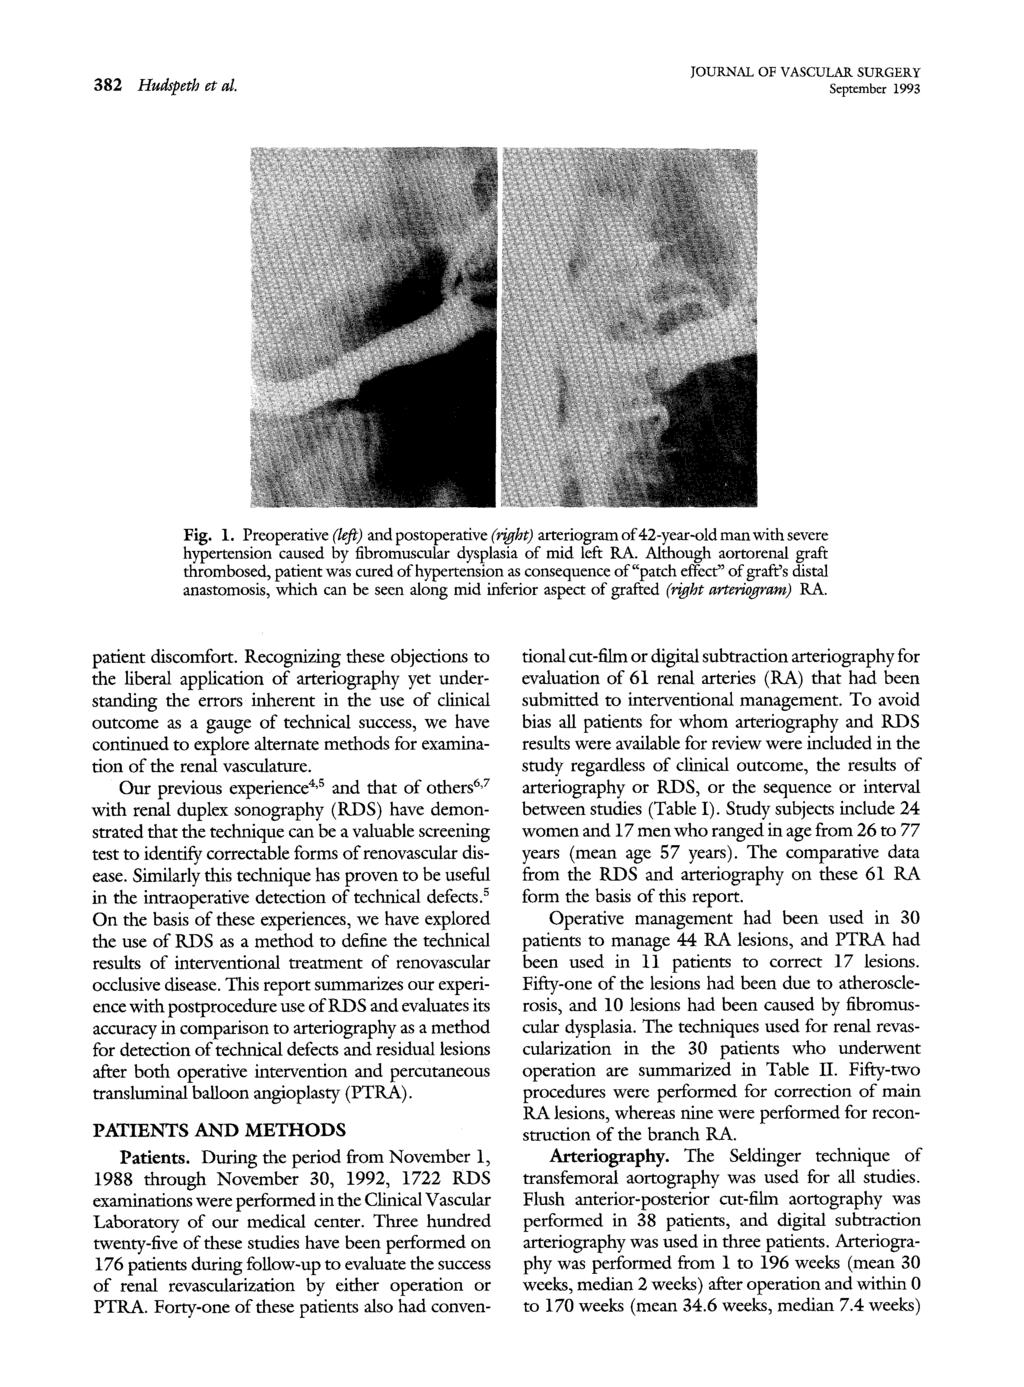 382 Hudspeth et al. September 1993 Fig. 1. Preoperative (left) and postoperative (right) arteriogram of42-year-old manwith severe hypertension caused by fibromuscular dysplasia of mid left RA.